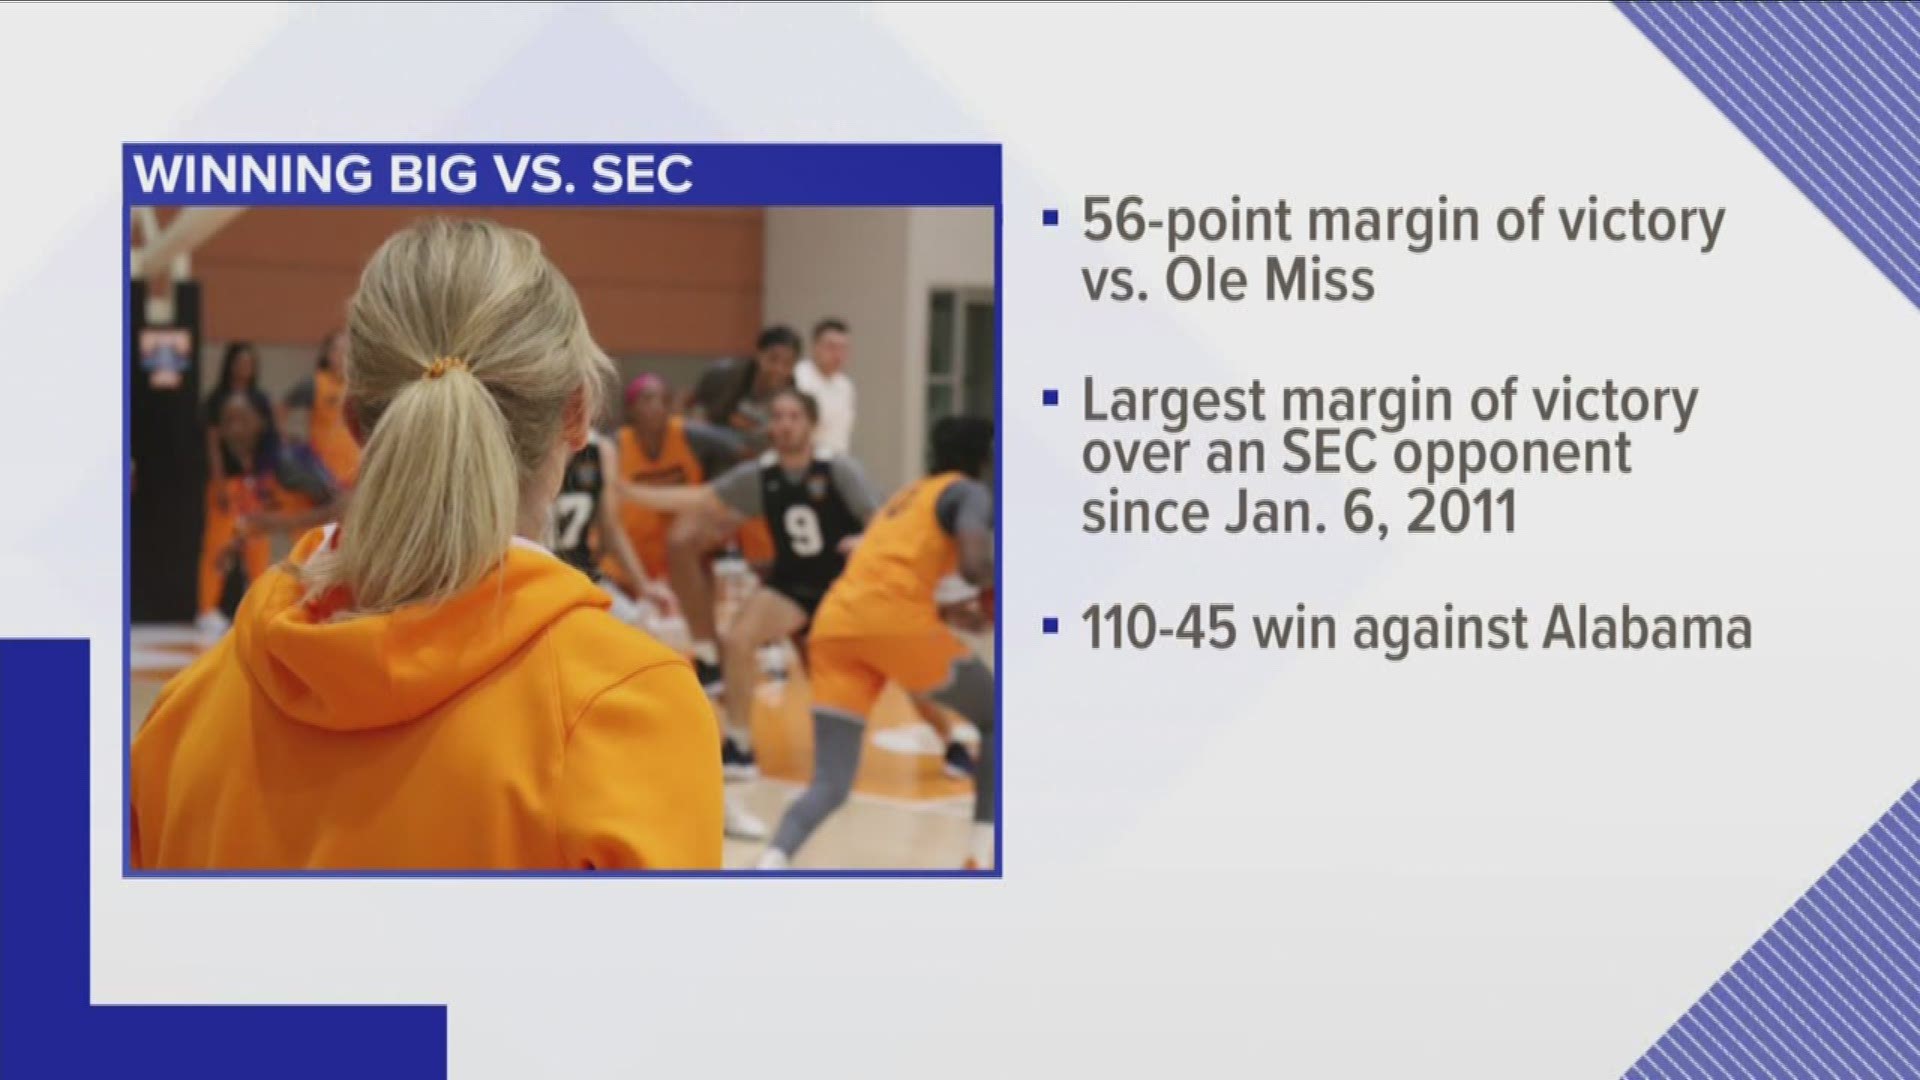 Tennessee's defense stifled Ole Miss, as the Lady Vols win by 56 points on the road.